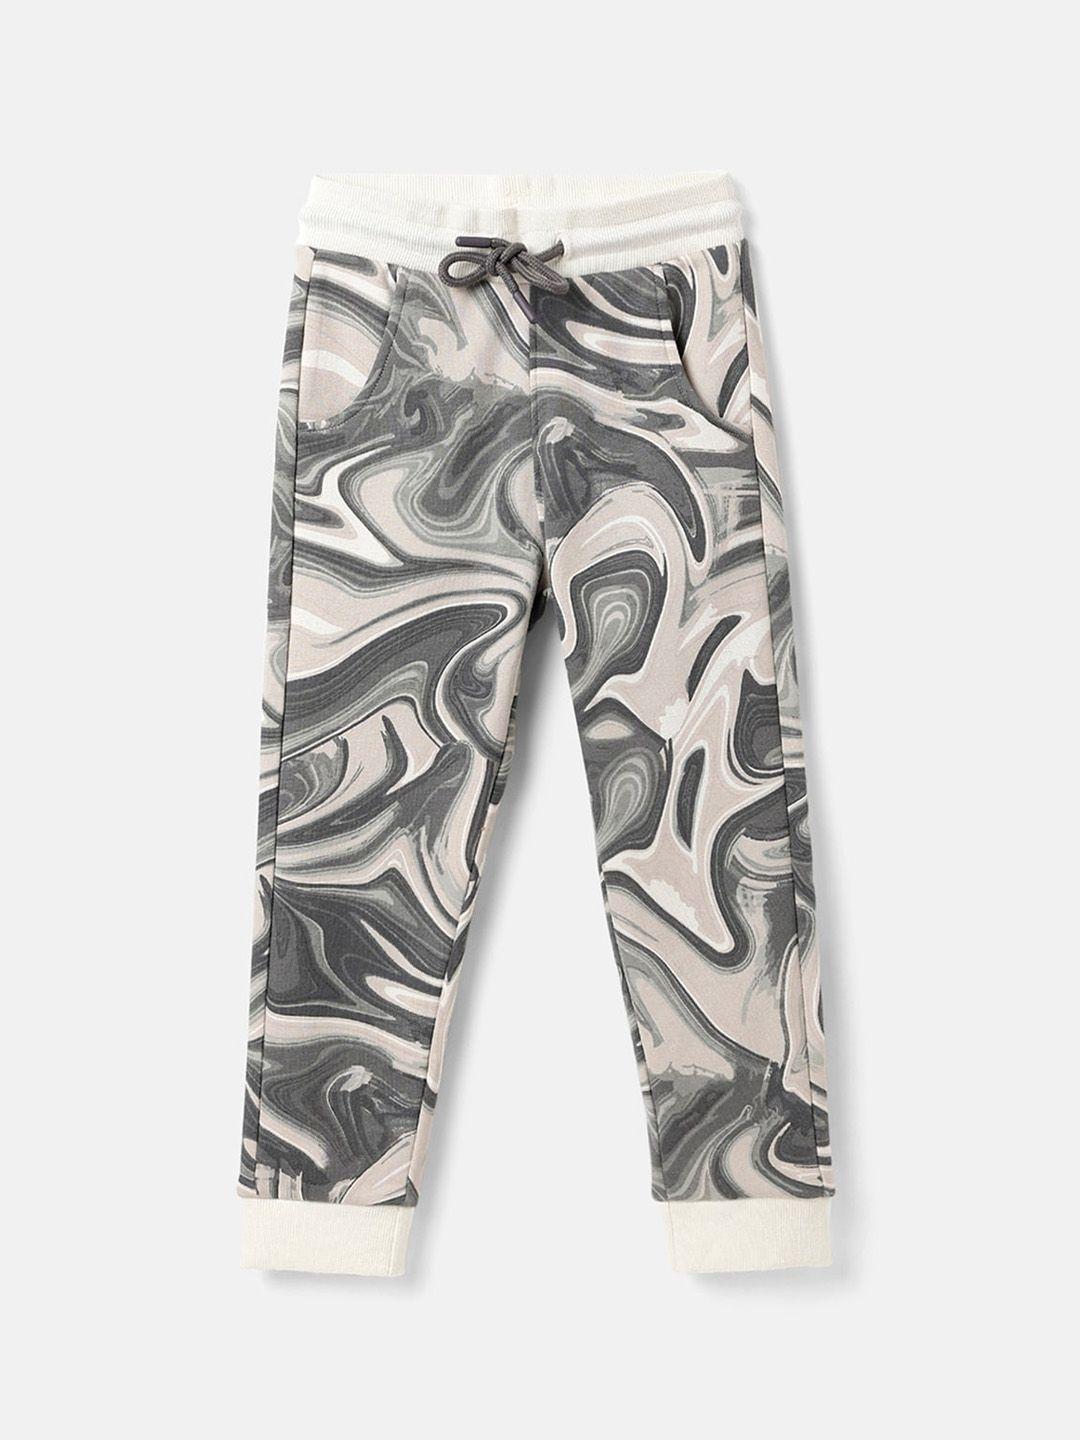 united-colors-of-benetton-boys-abstract-printed-trousers